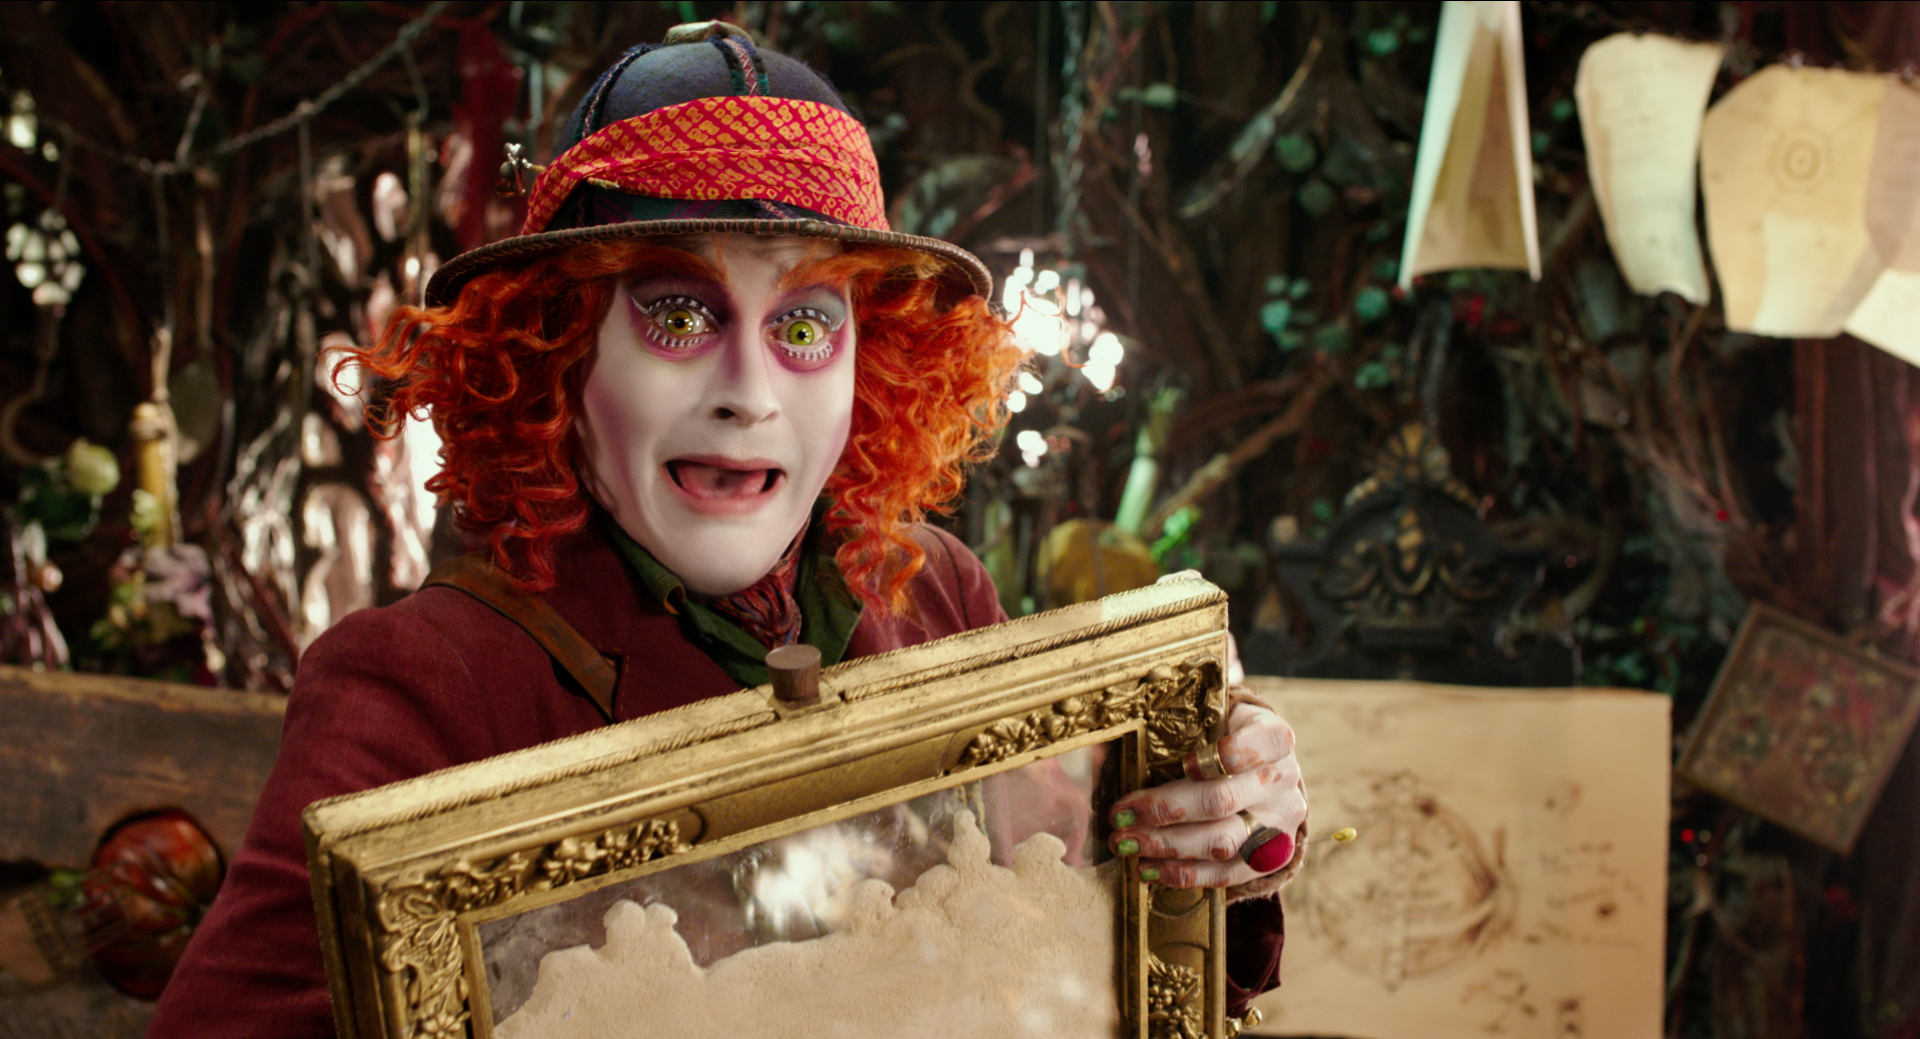 ALICE THROUGH THE LOOKING GLASS movie review